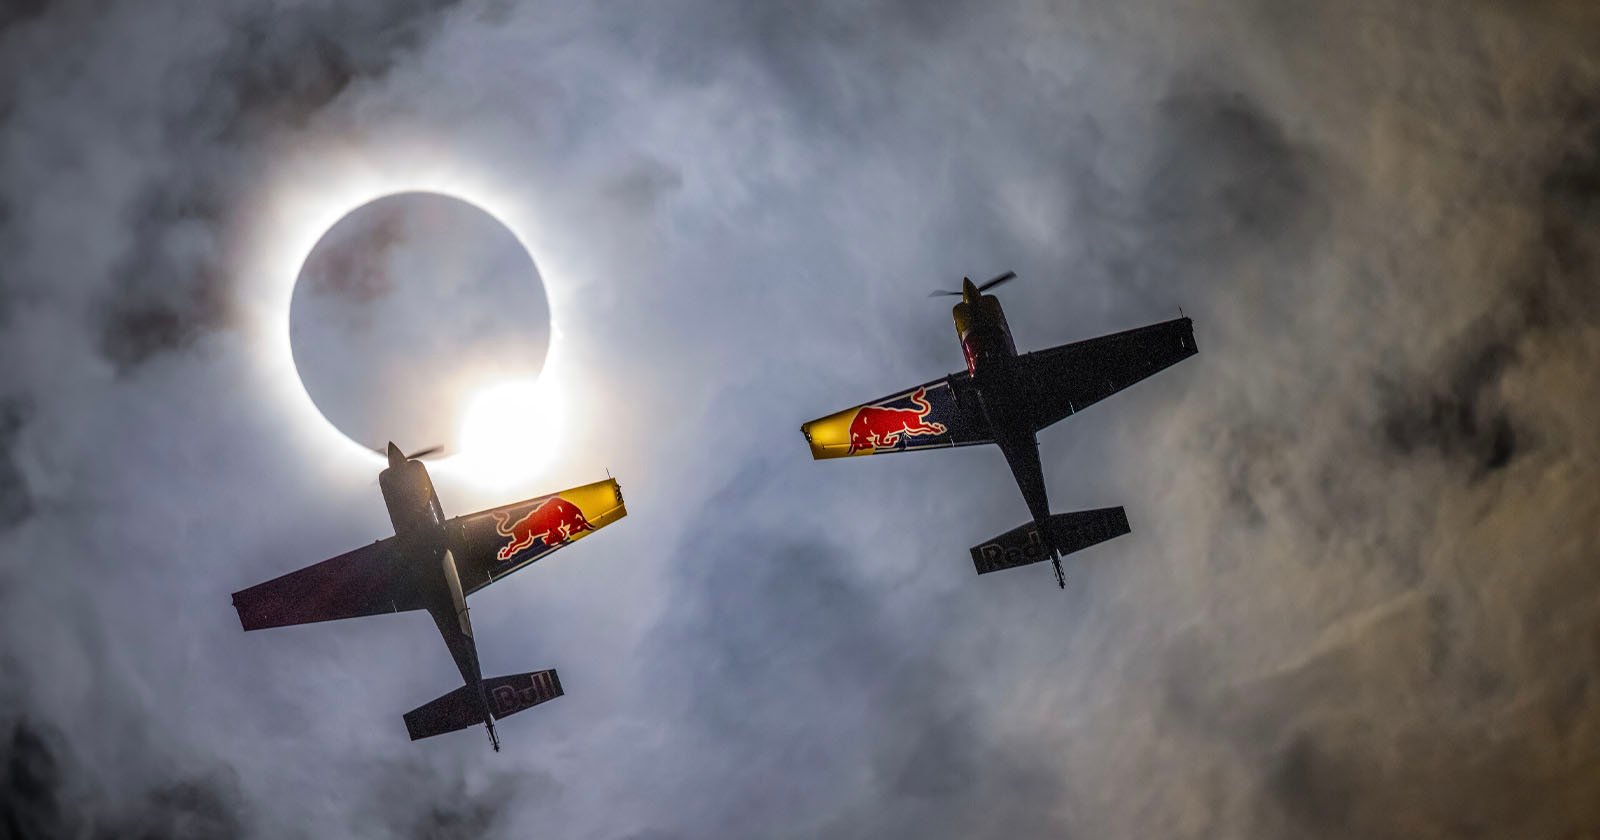 Pilots and Photographers Team Up for a Fly-Through of the Solar Eclipse